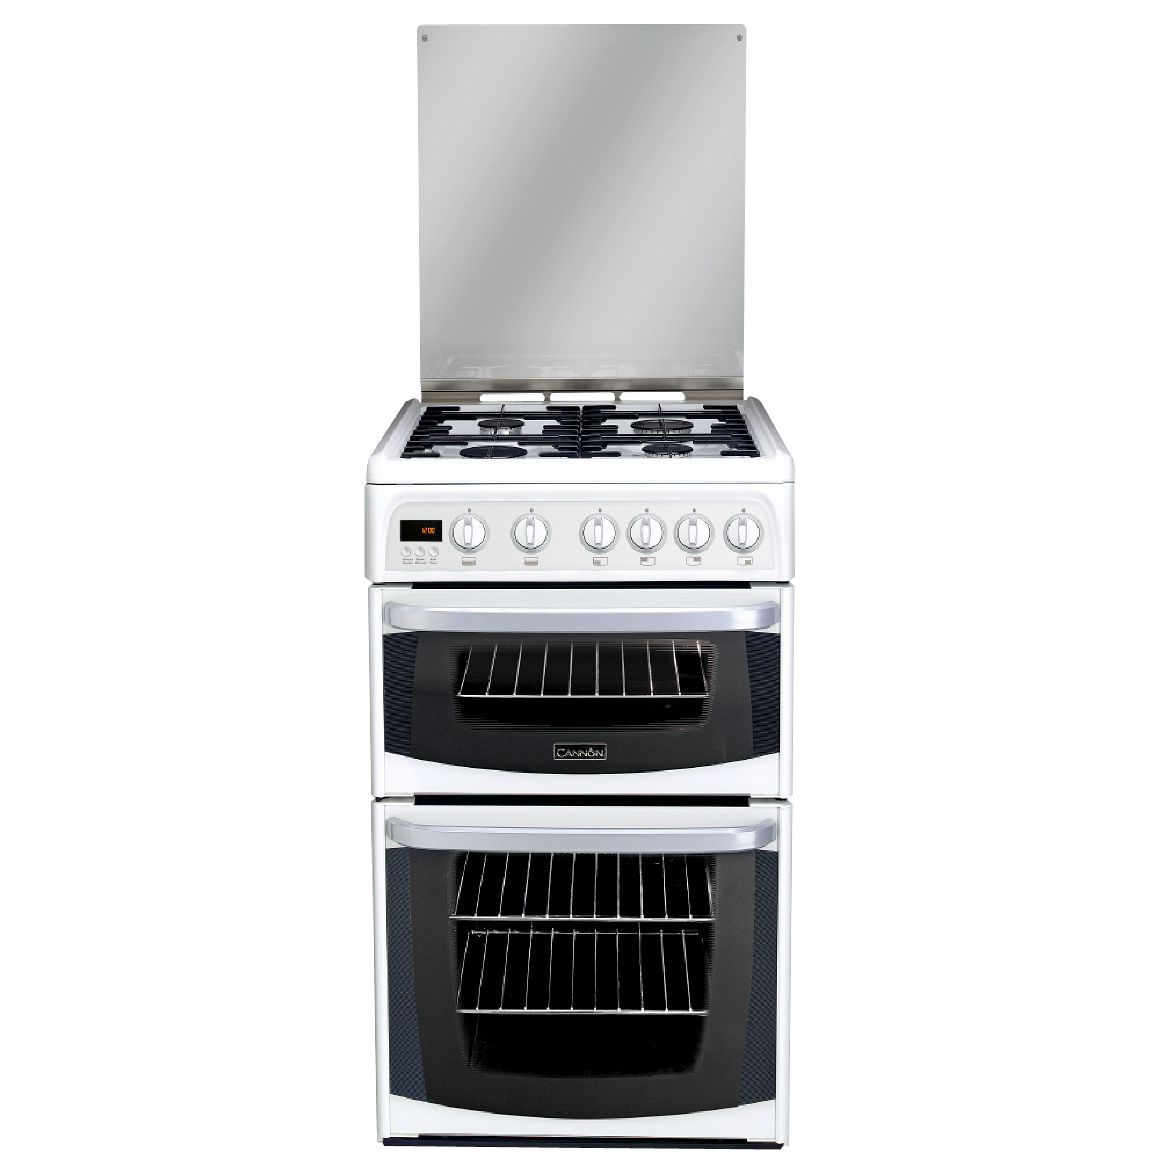 Cannon C50GCWF Coniston Gas Cooker, White at John Lewis